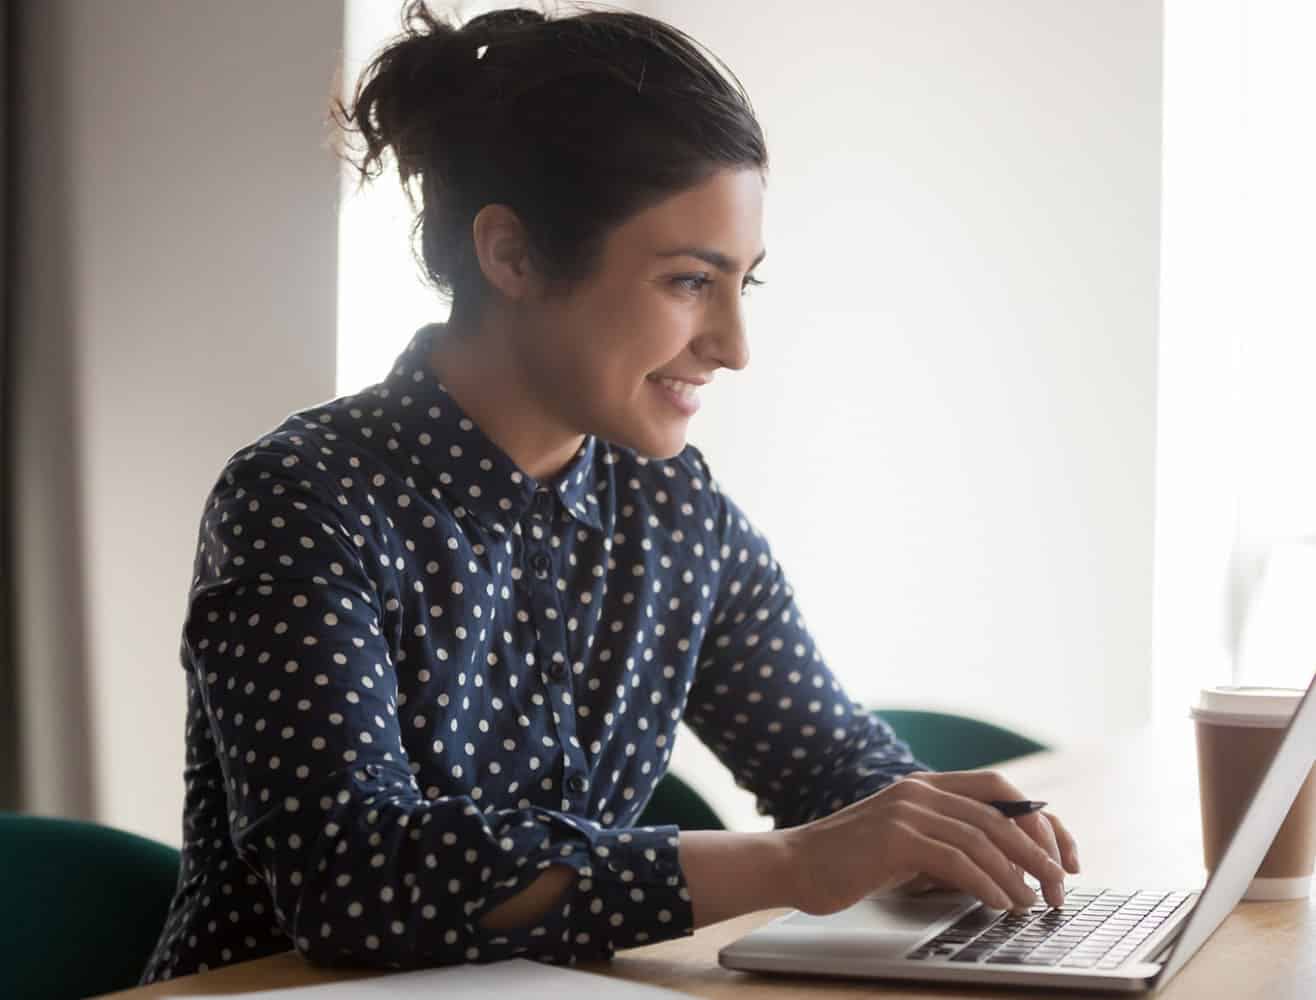 Woman working at desk on laptop